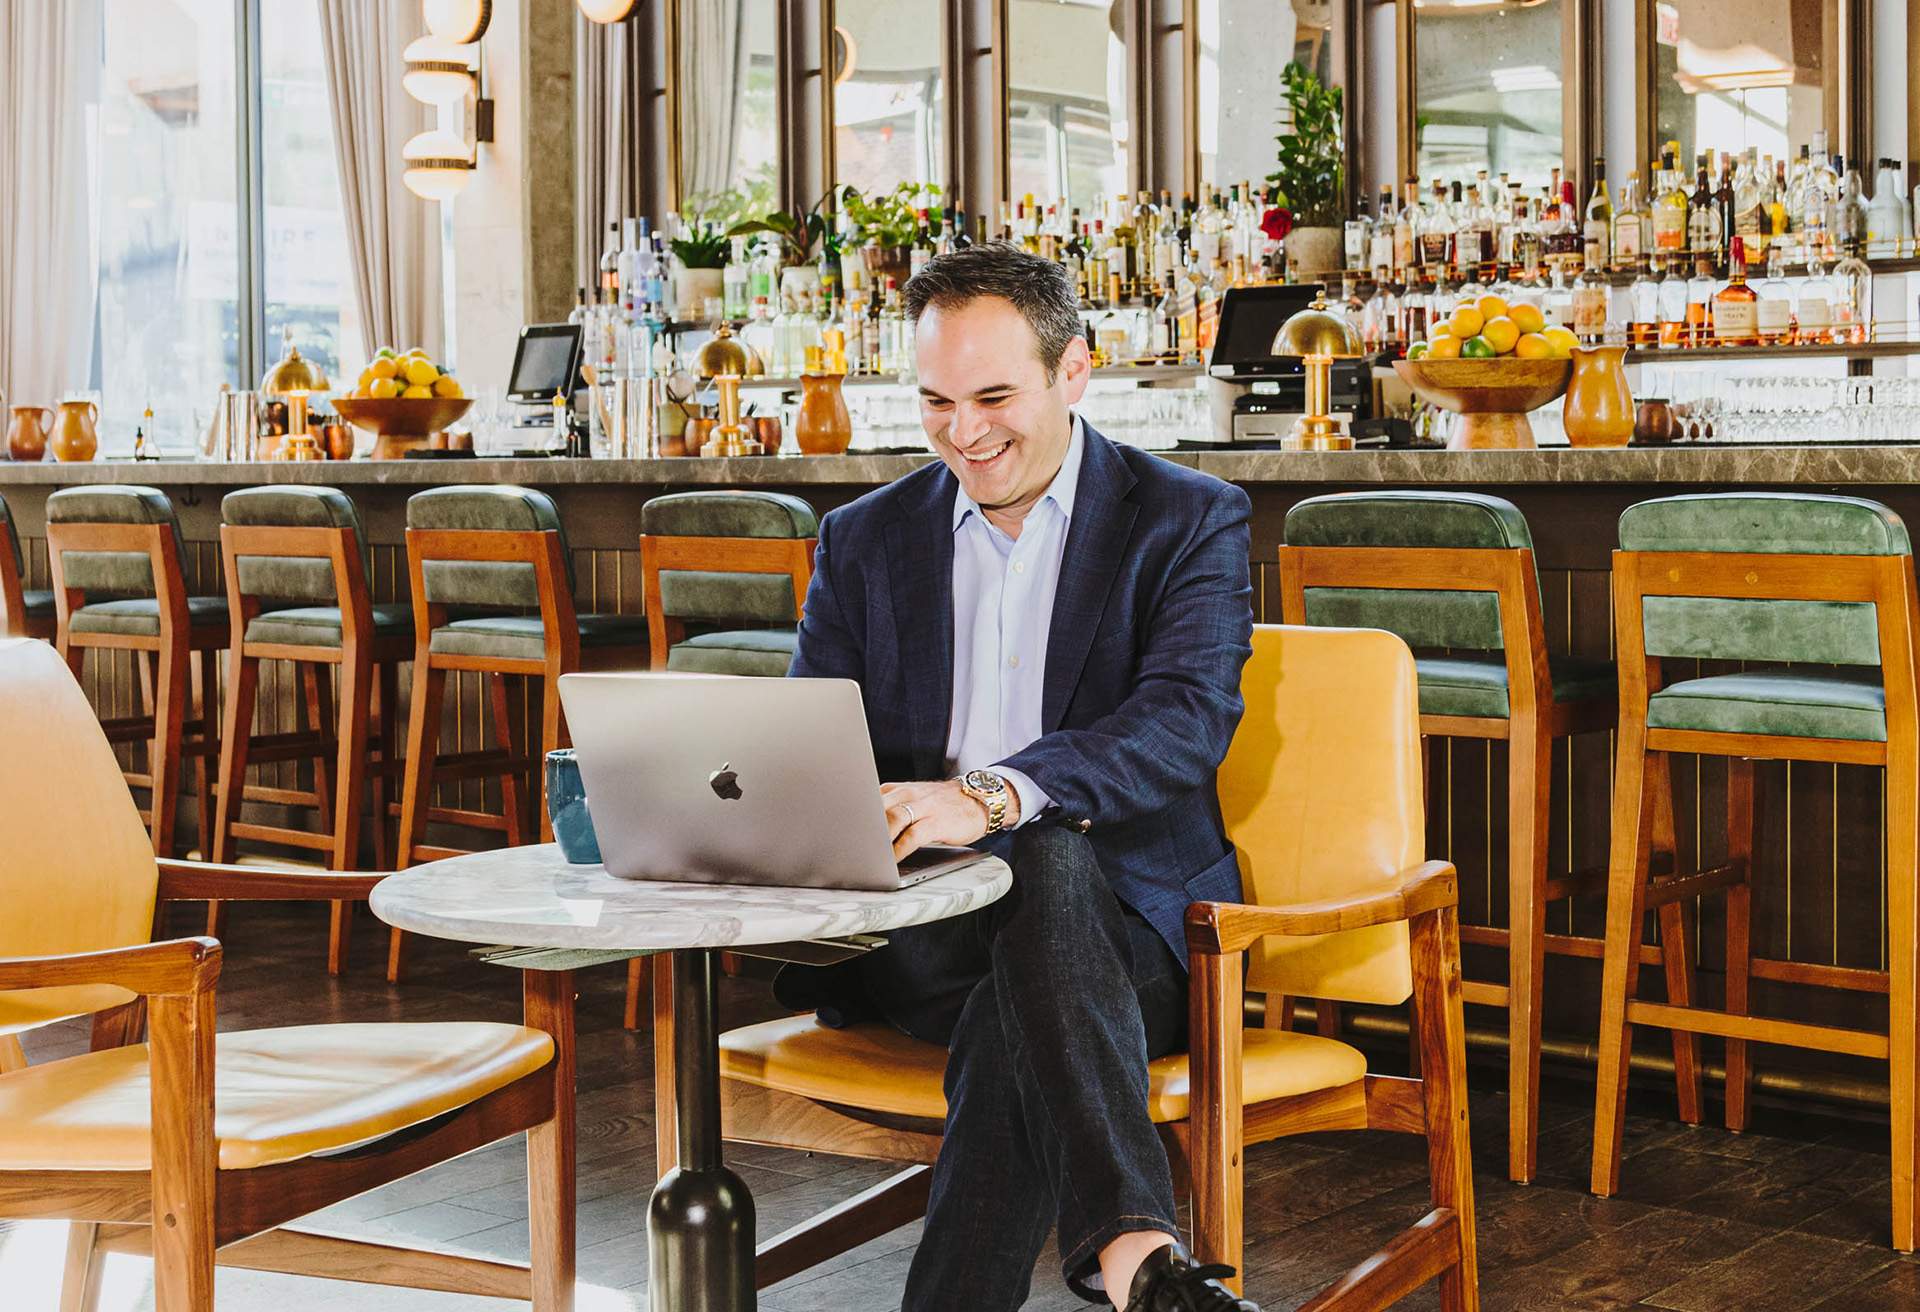 Image depicts a restaurant owner working on a laptop. The man is sitting at one of the restaurant tables